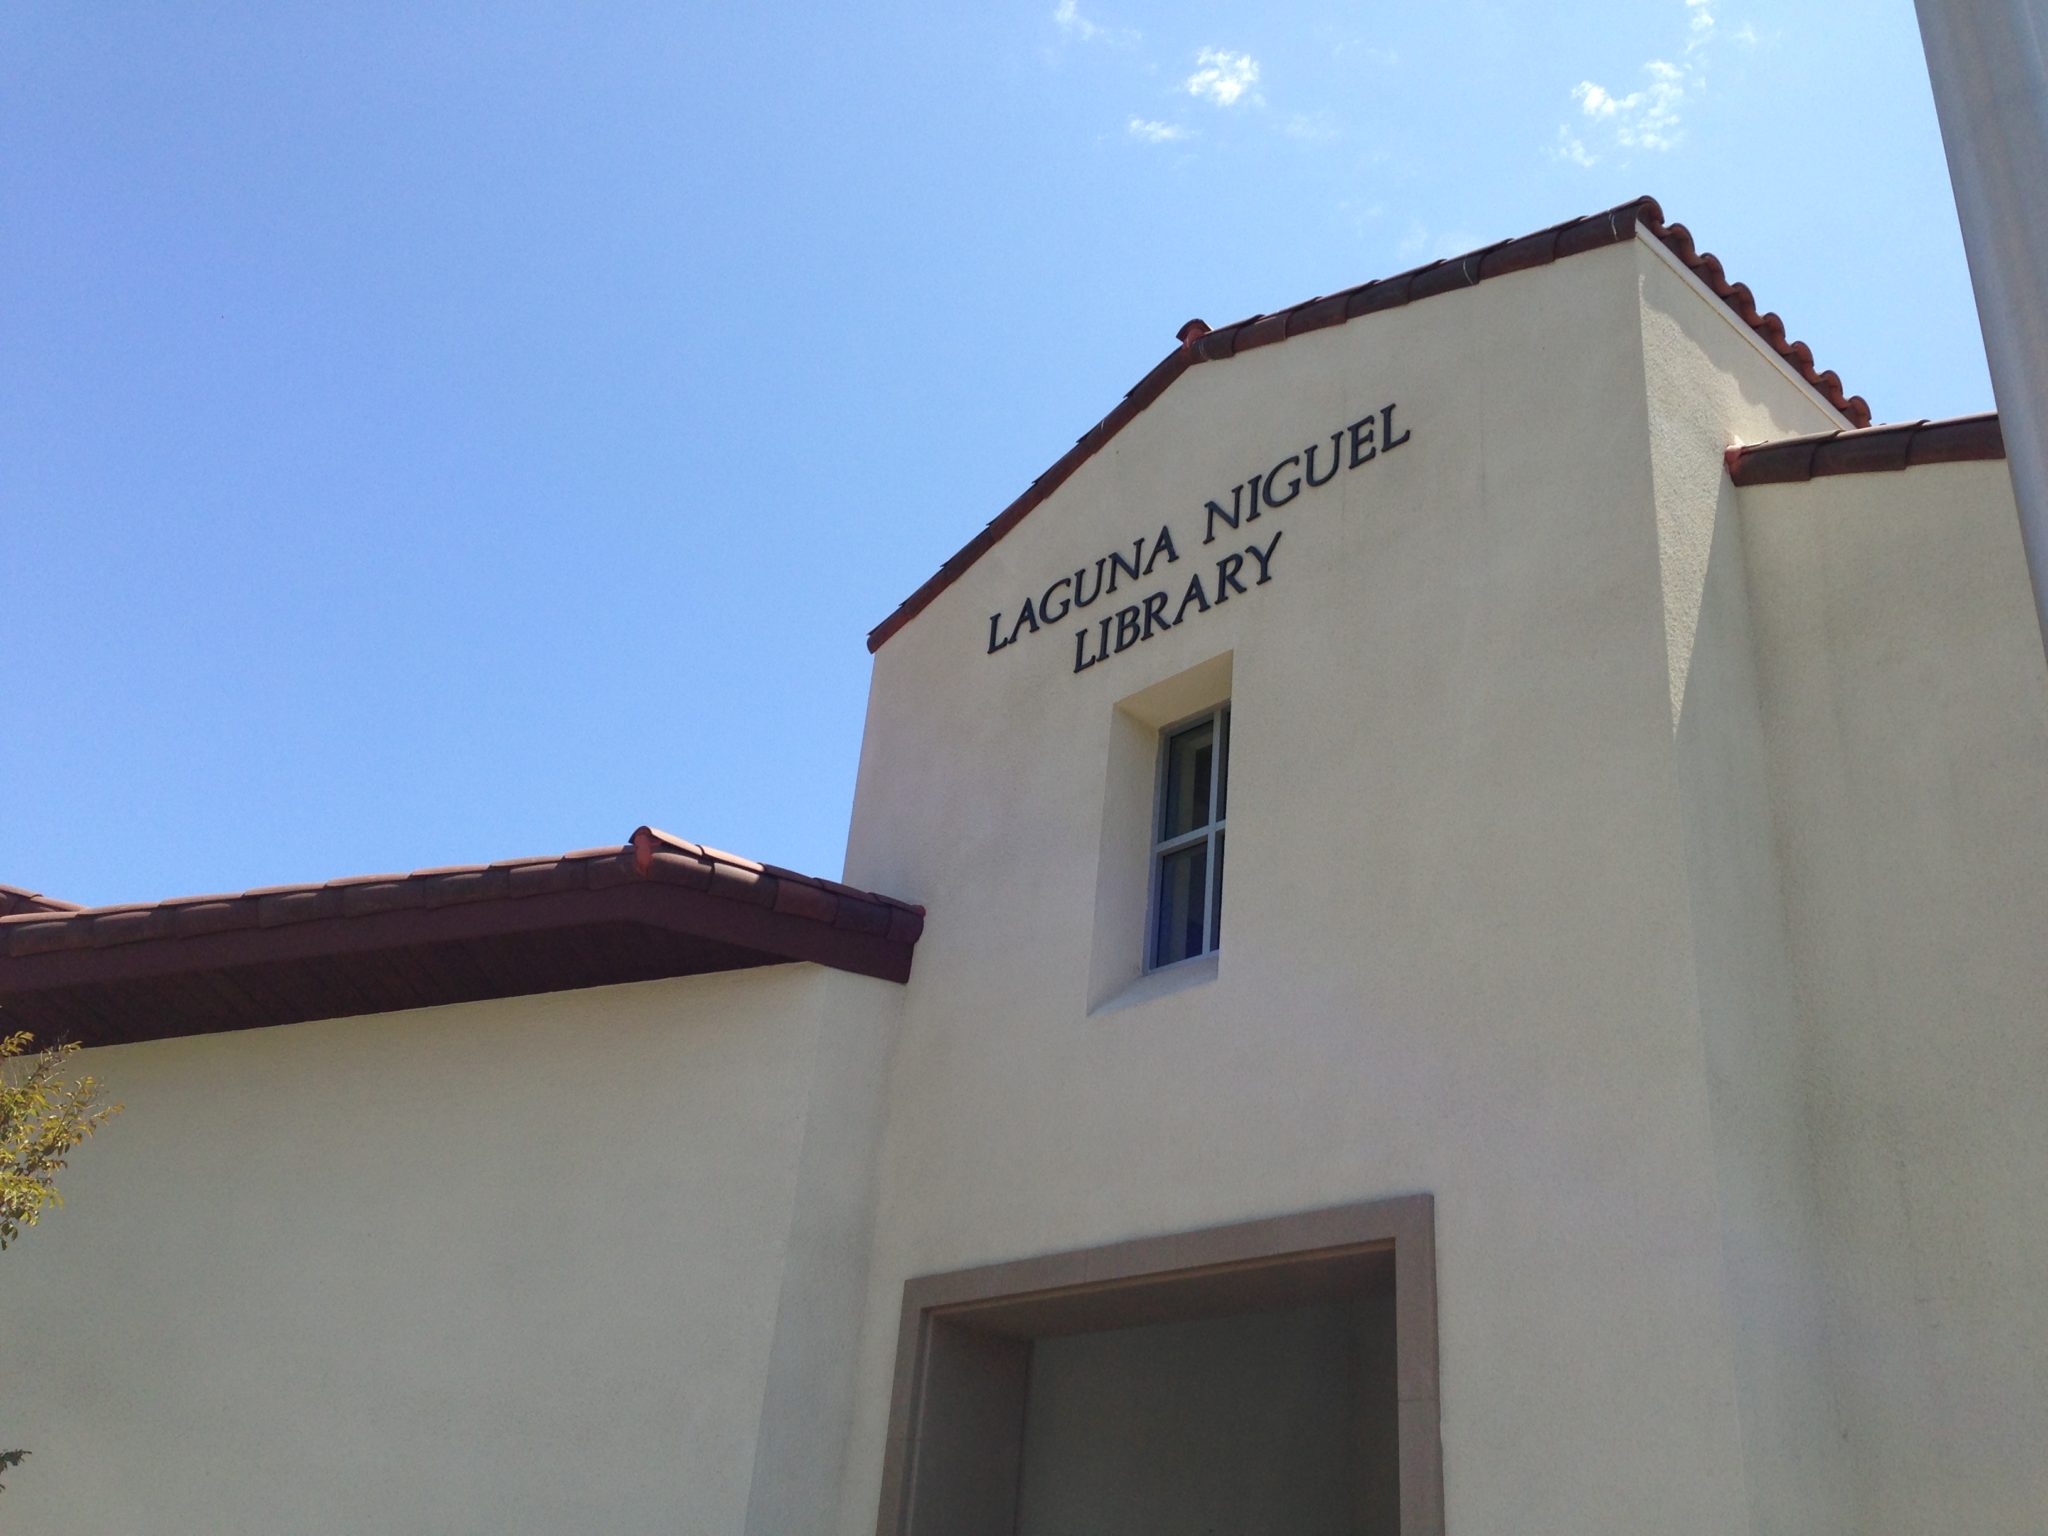 Laguna Niguel Public Library Pair with Nature Hikes or a Garden Walk